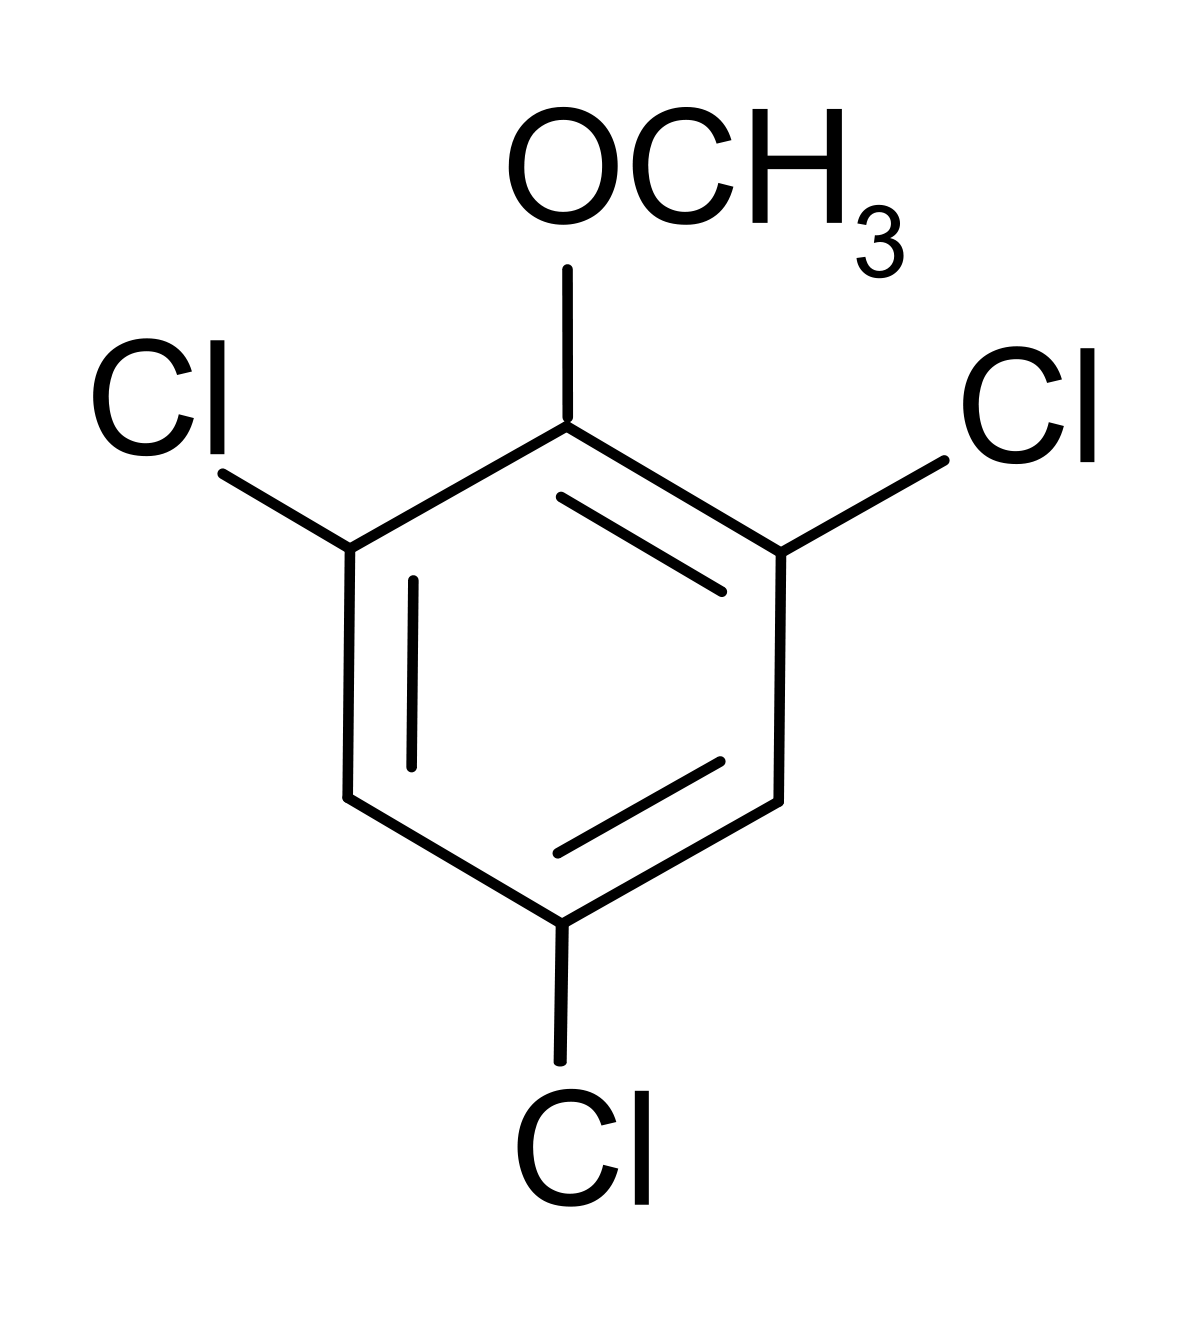 Chemical structure of 2,4,6-trichloroanisole